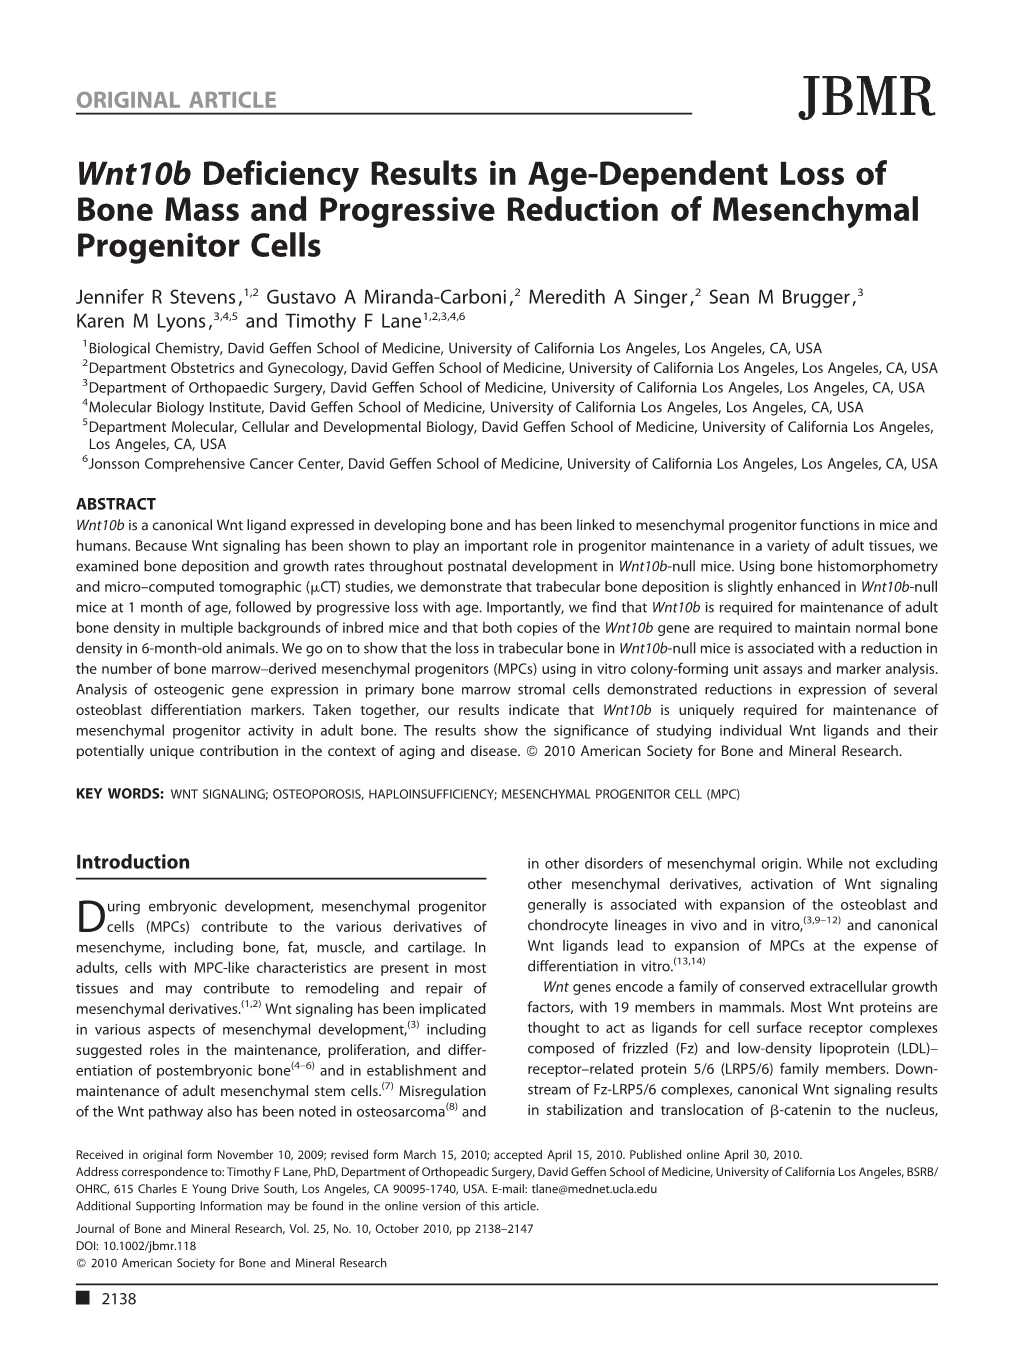 Wnt10b Deficiency Results in Age?Dependent Loss of Bone Mass